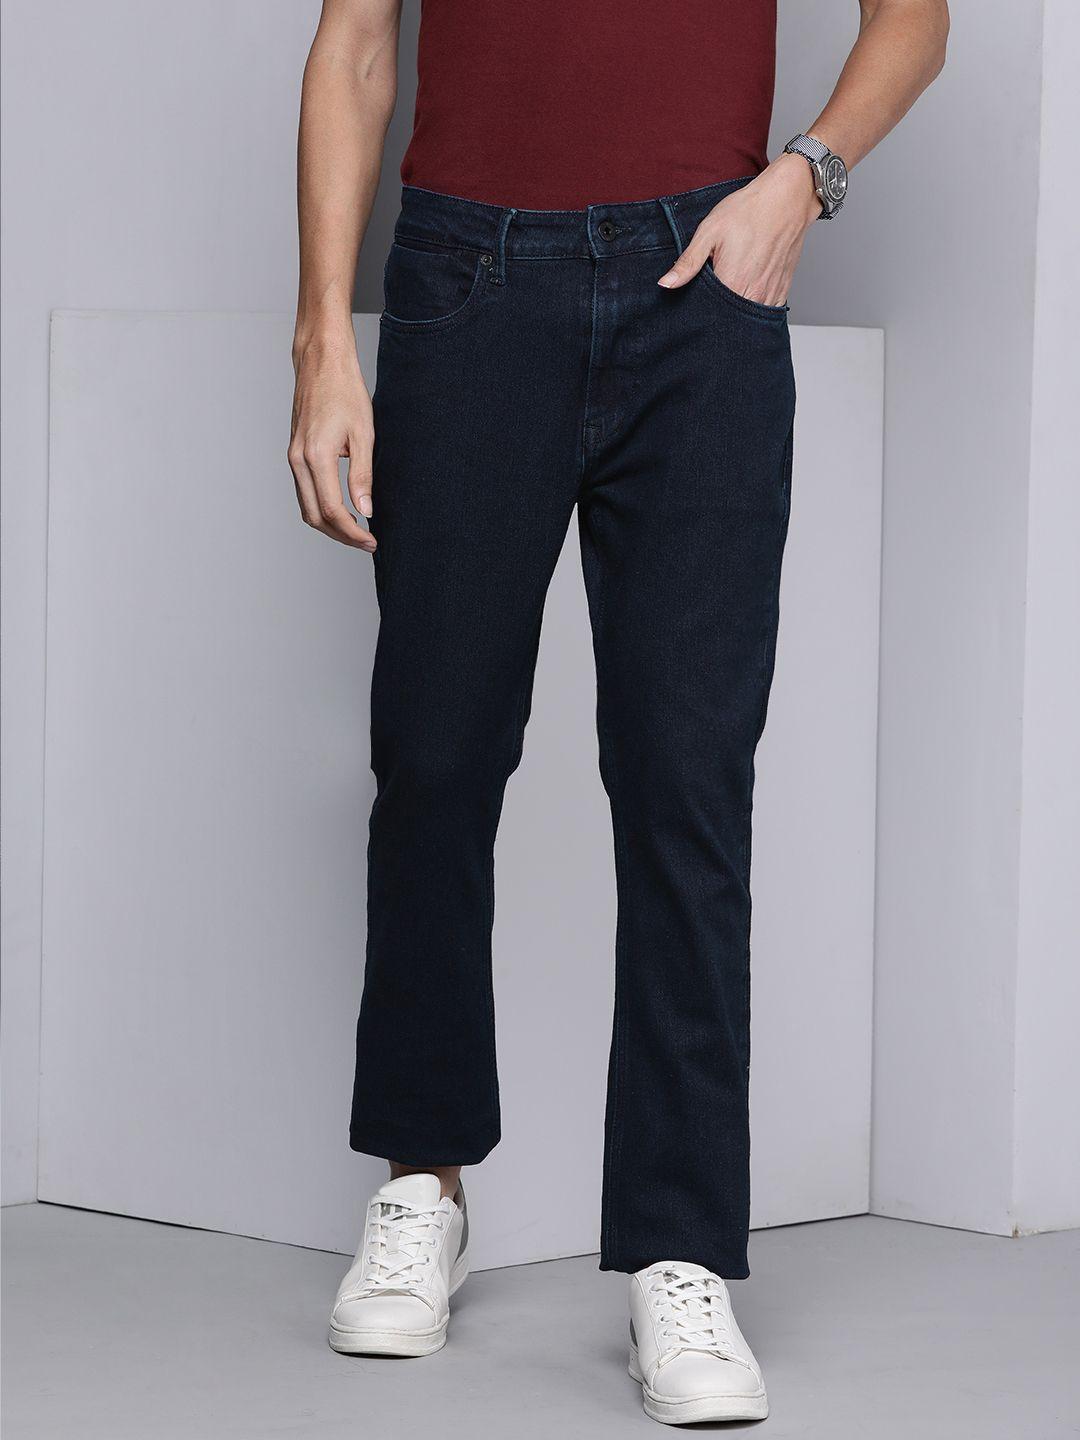 kenneth-cole-men-navy-blue-clean-look-slim-fit-mid-rise-primus-jeans